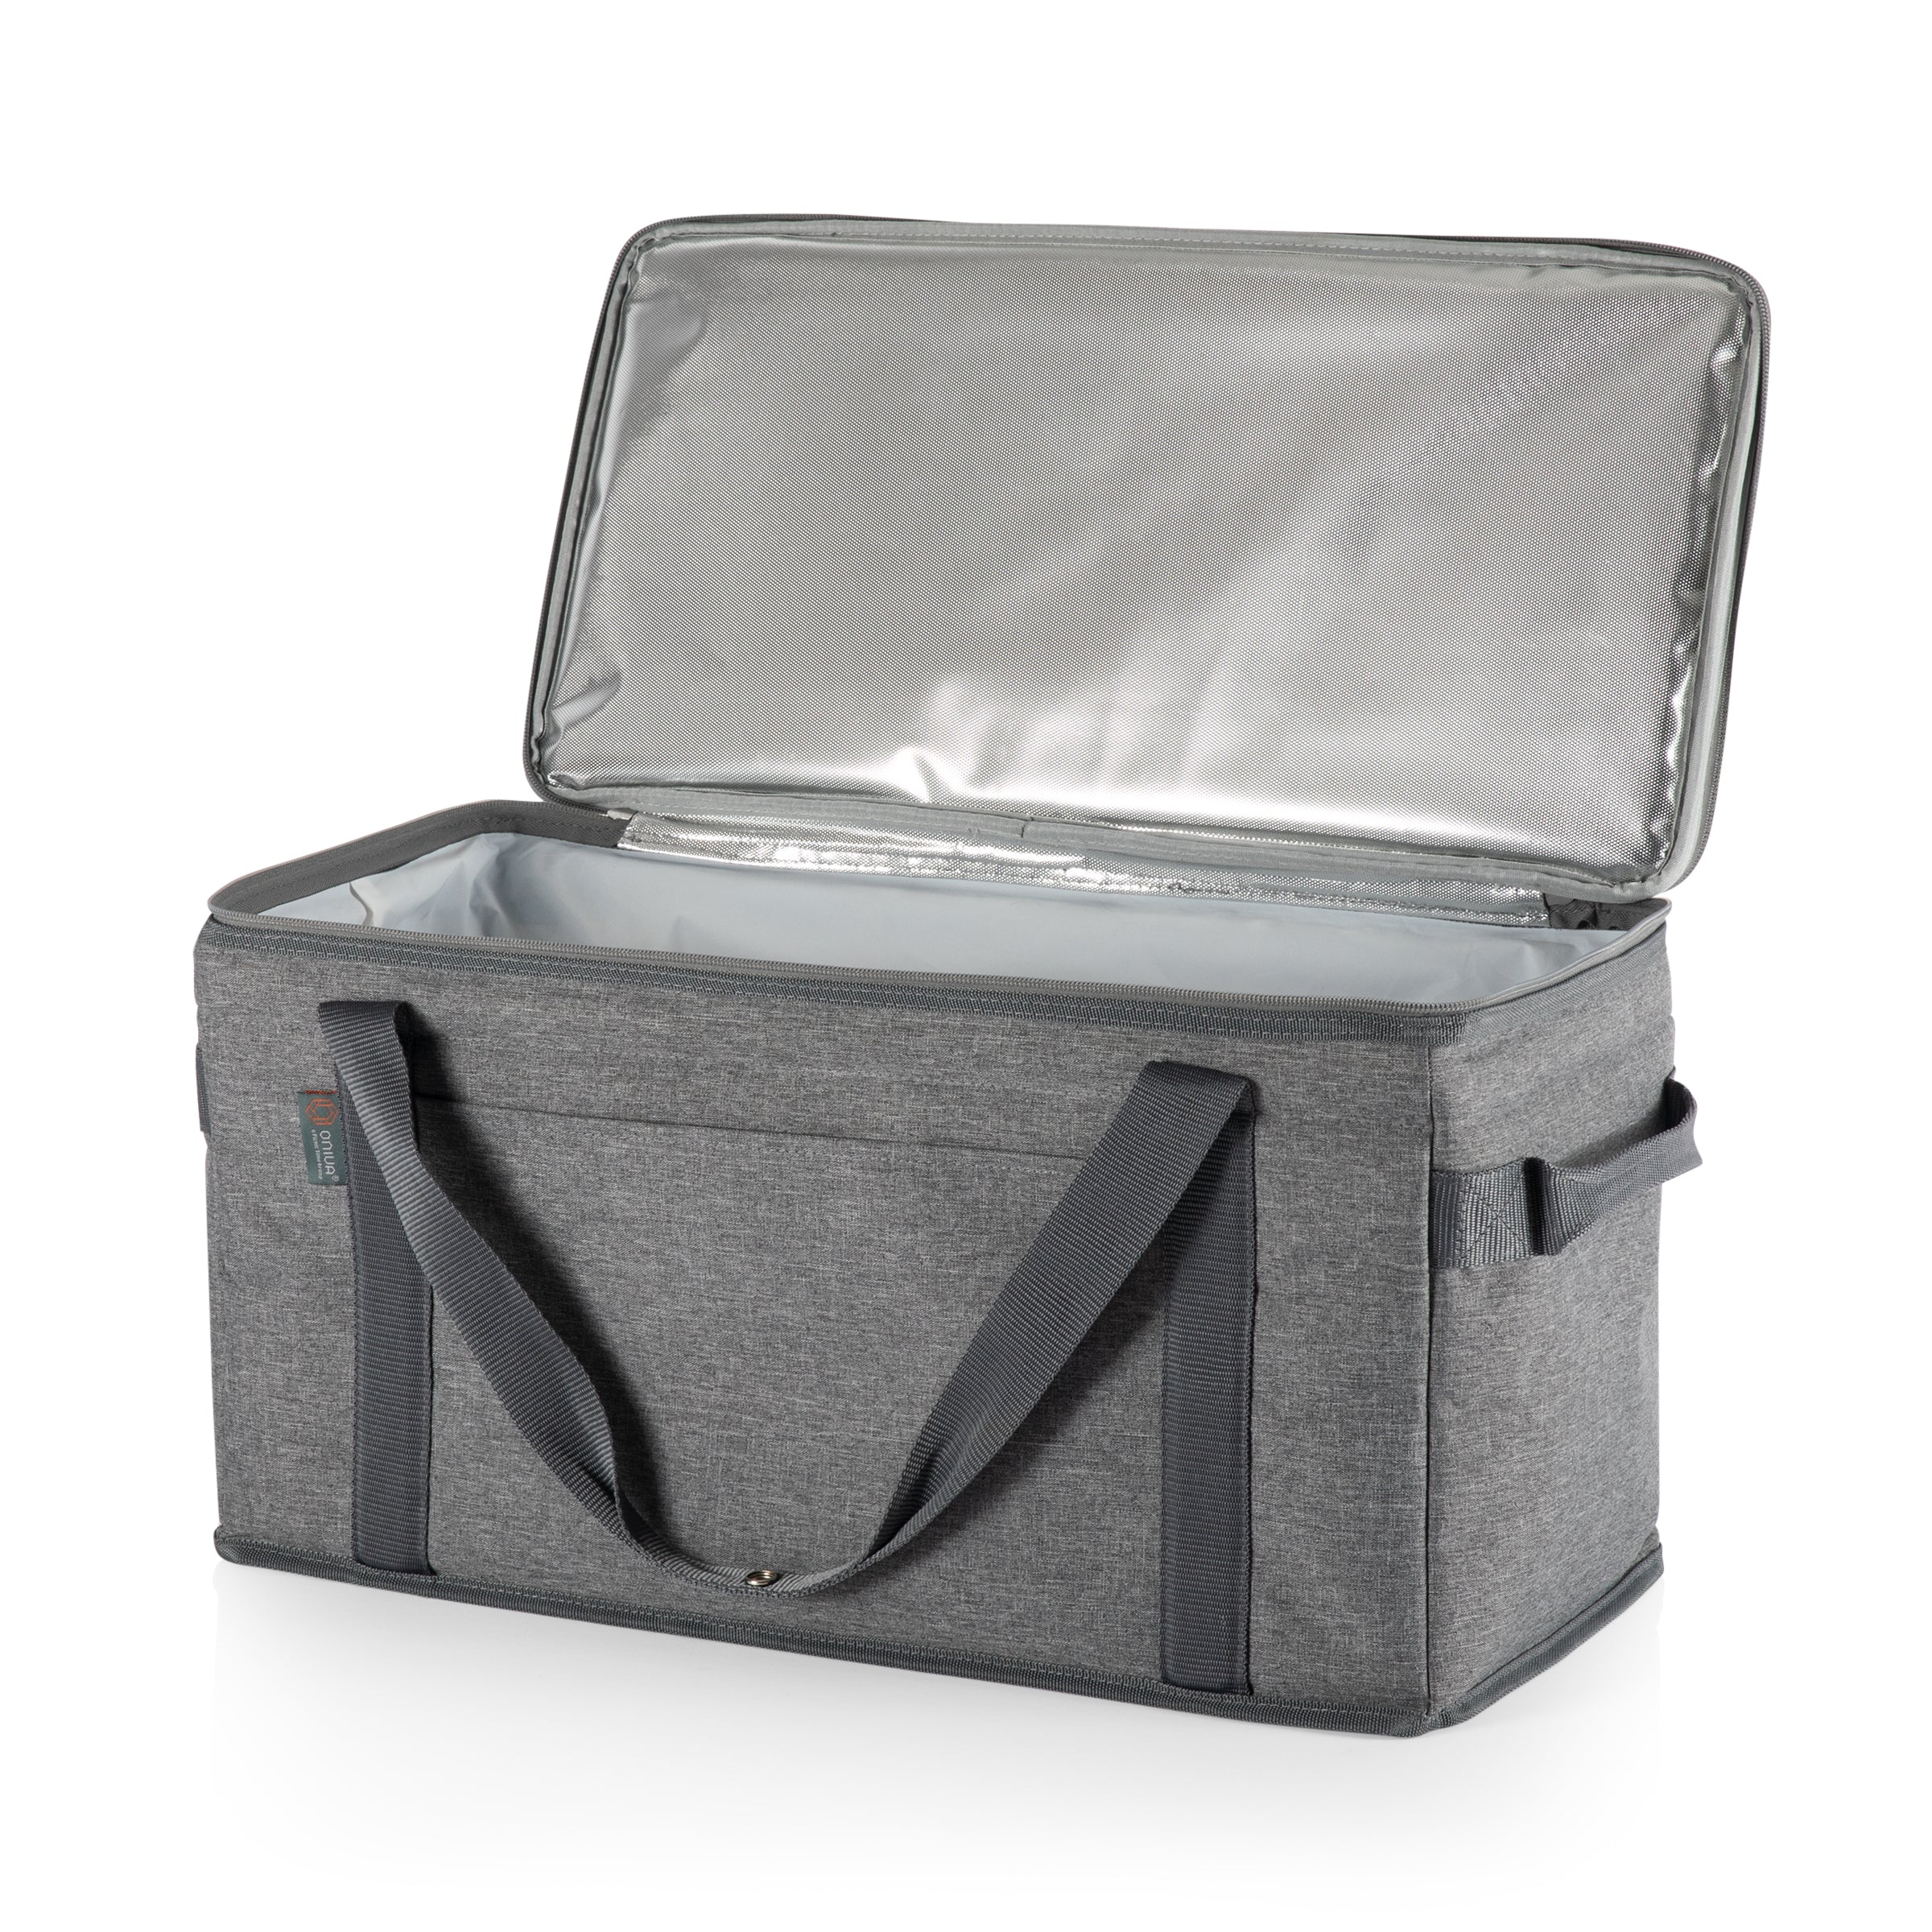 Auburn Tigers - 64 Can Collapsible Cooler